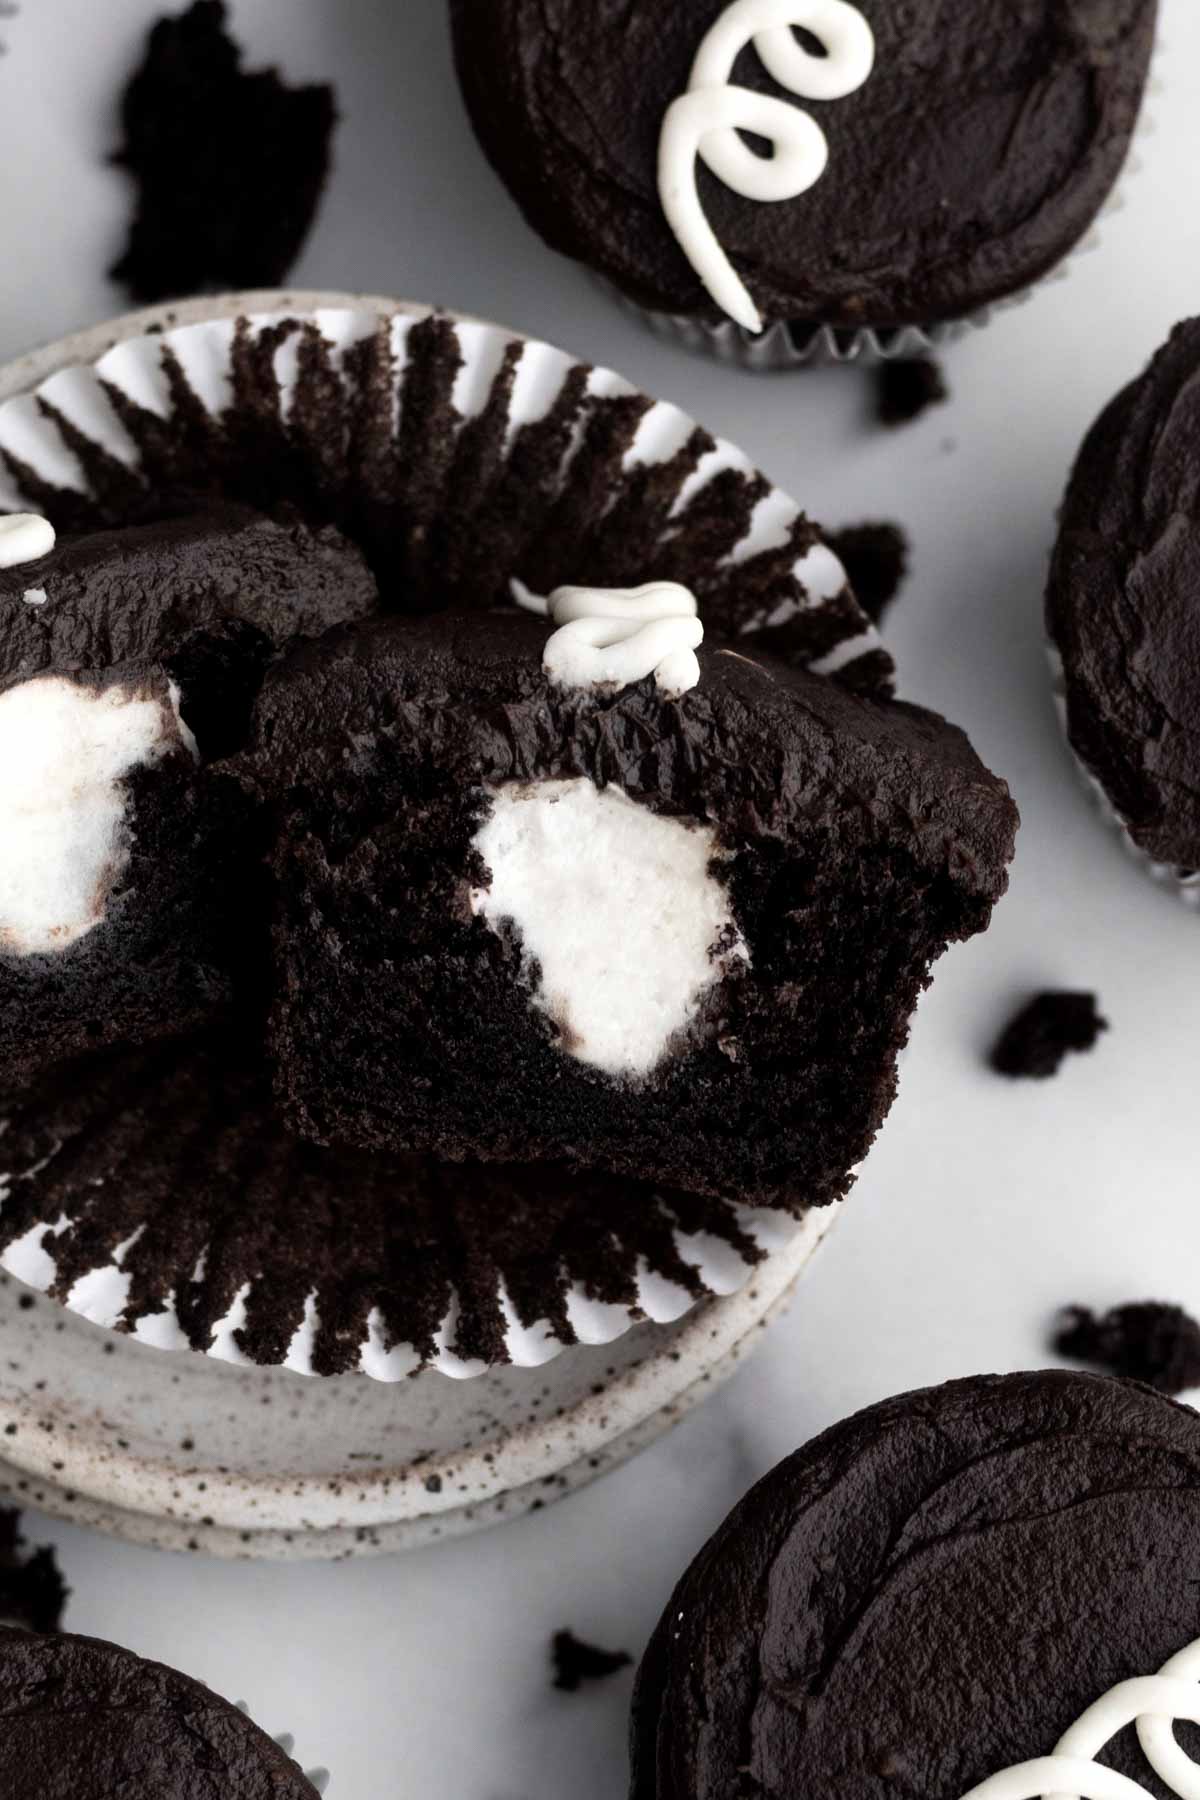 A chocolate cupcake sliced in half with a vanilla frosting core.